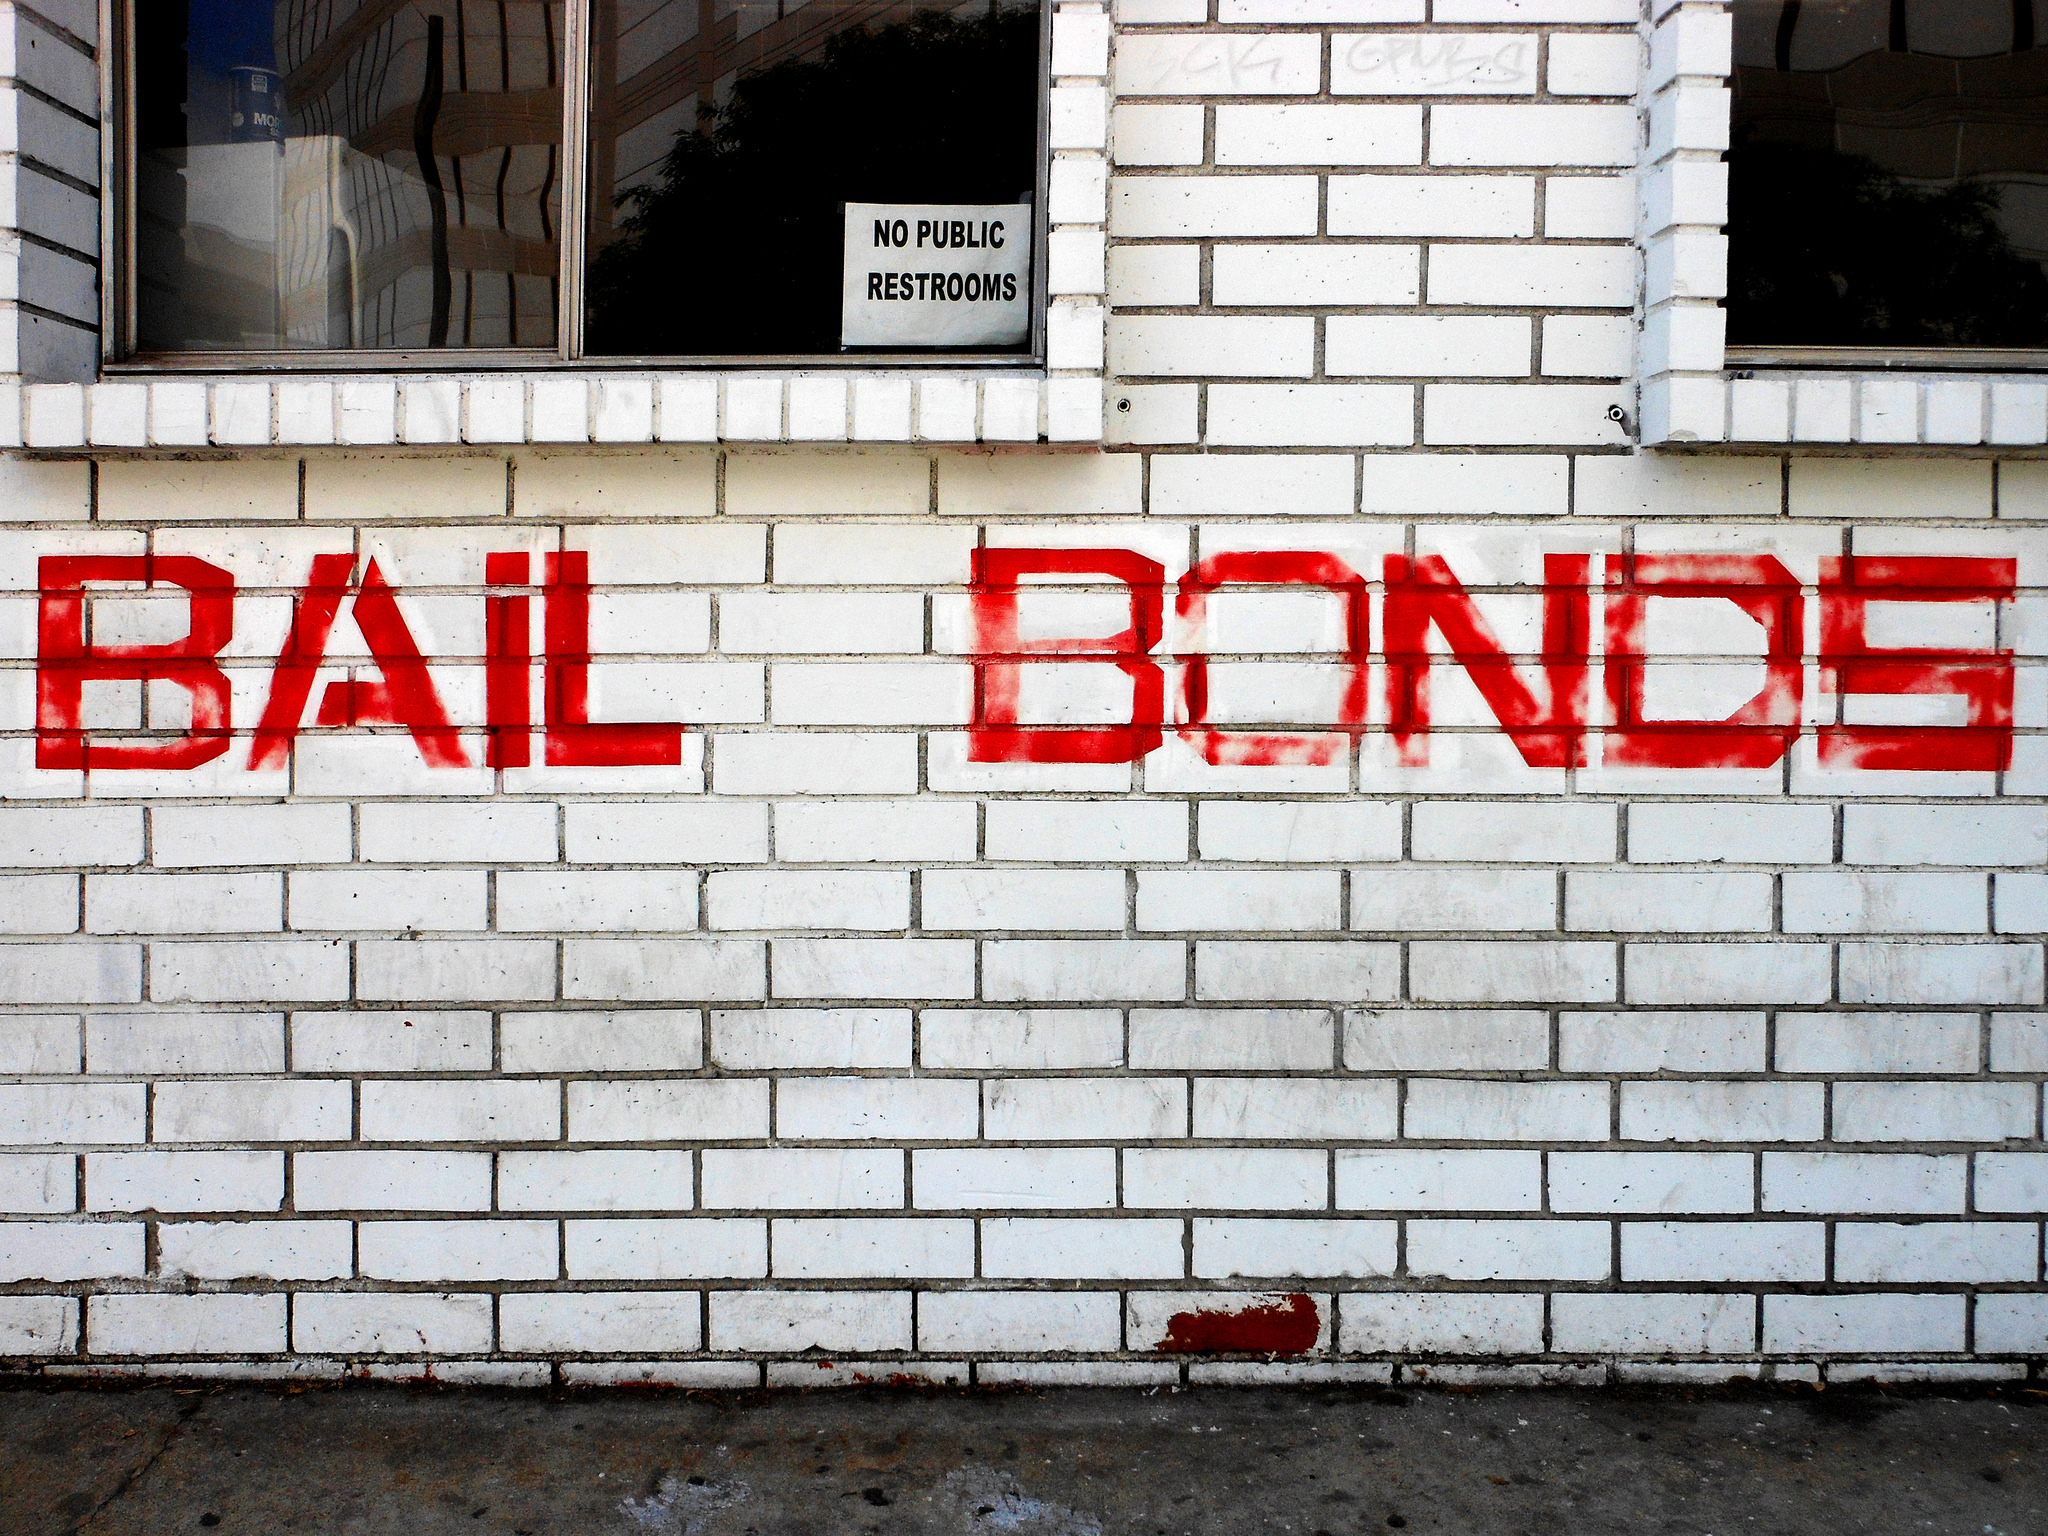 A brick wall with the words "Bail Bonds" painted in red capital letters